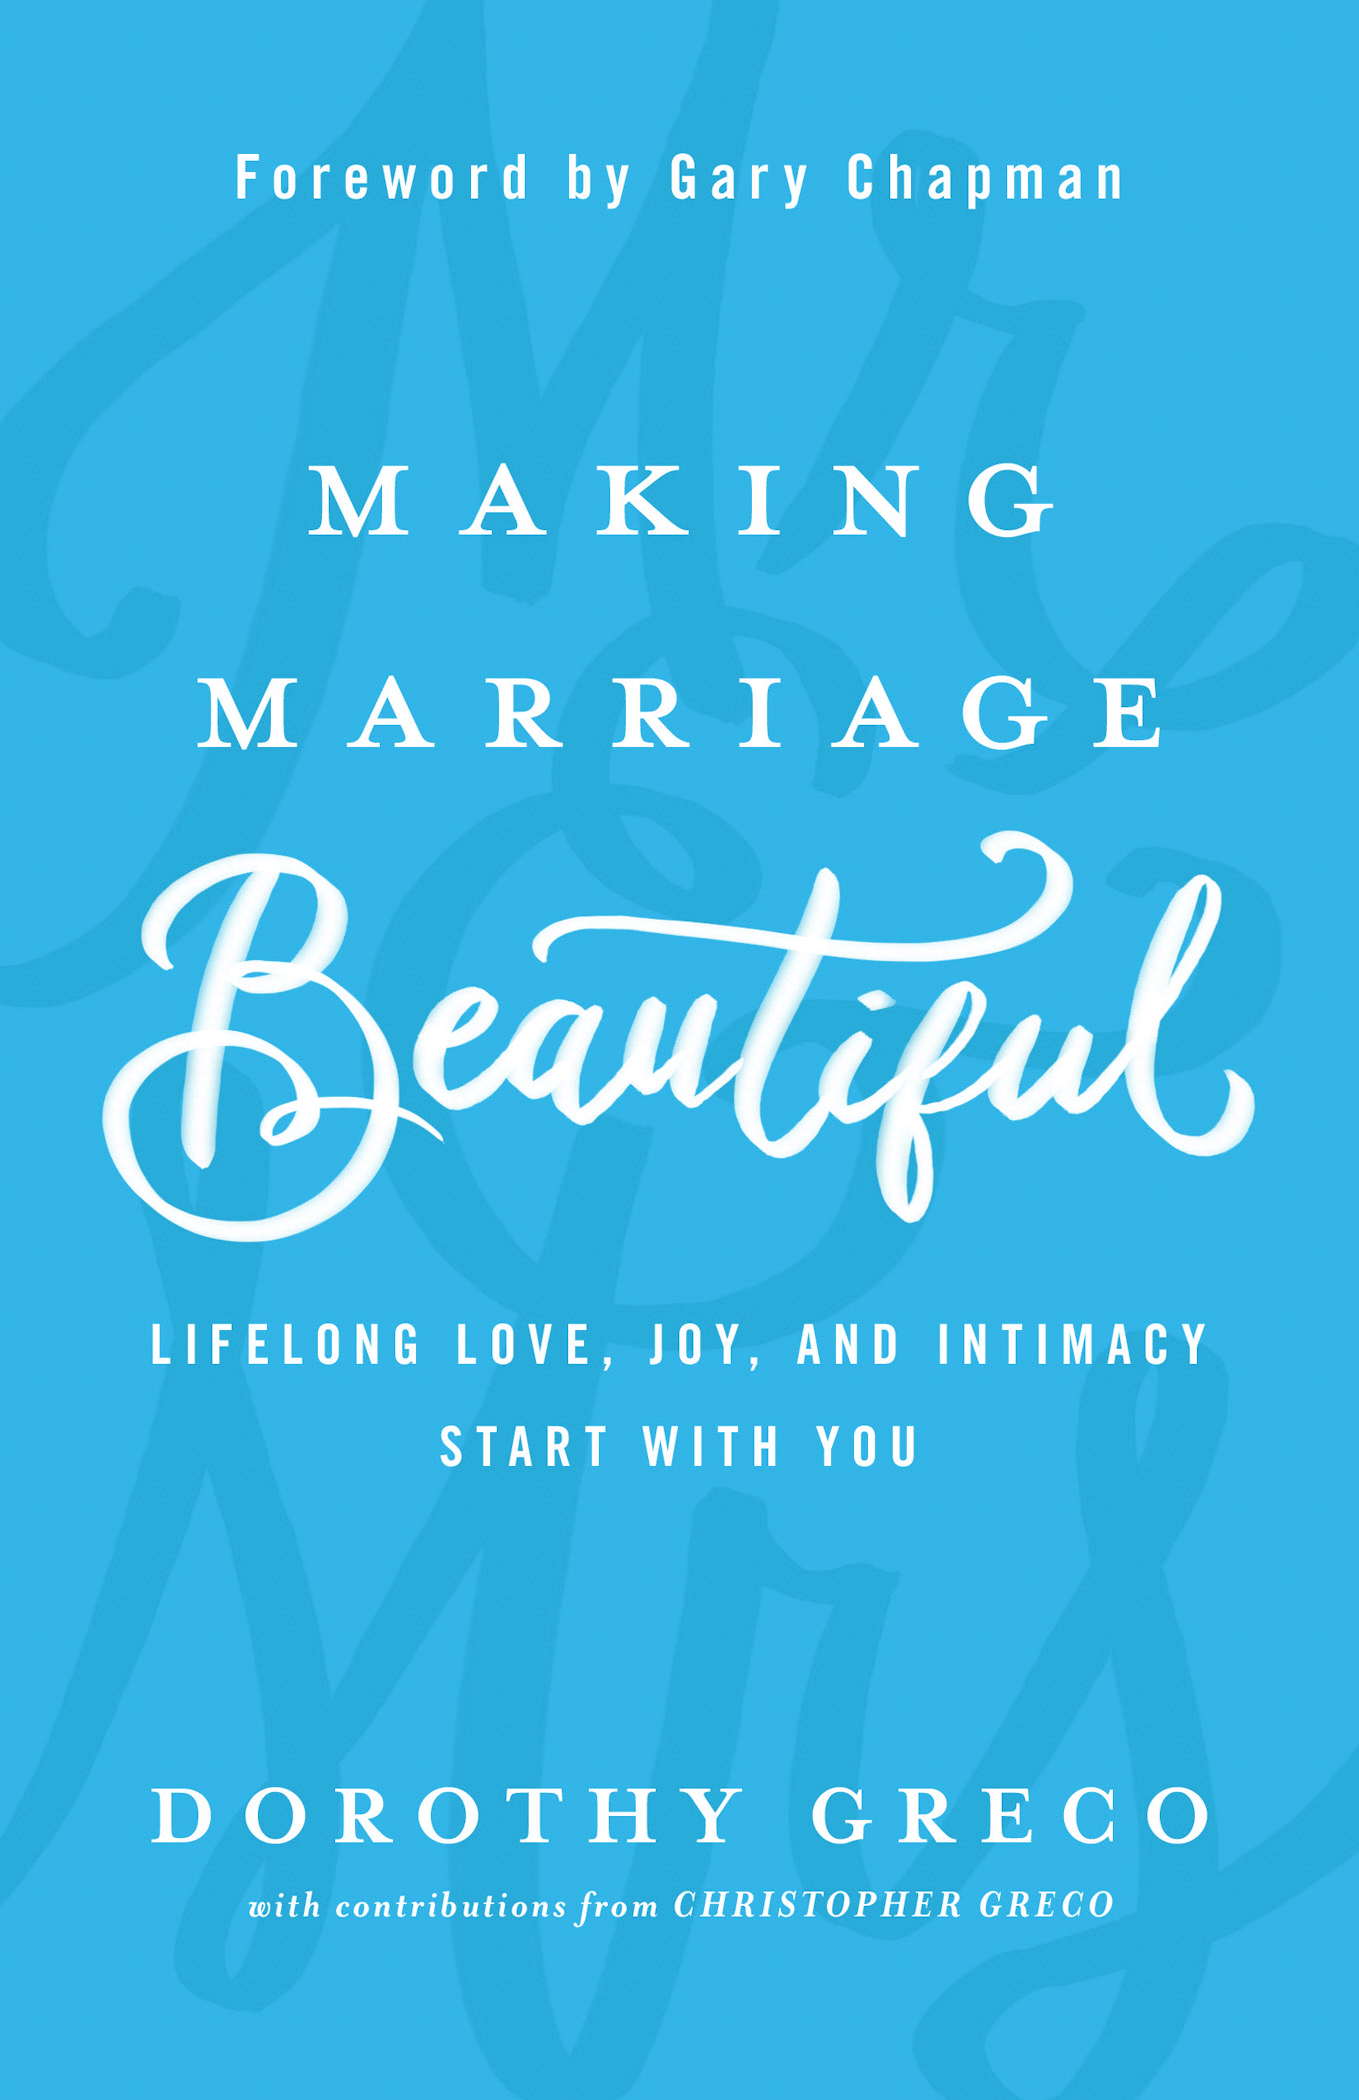 Making Marriage Beautiful Cover Reveal!